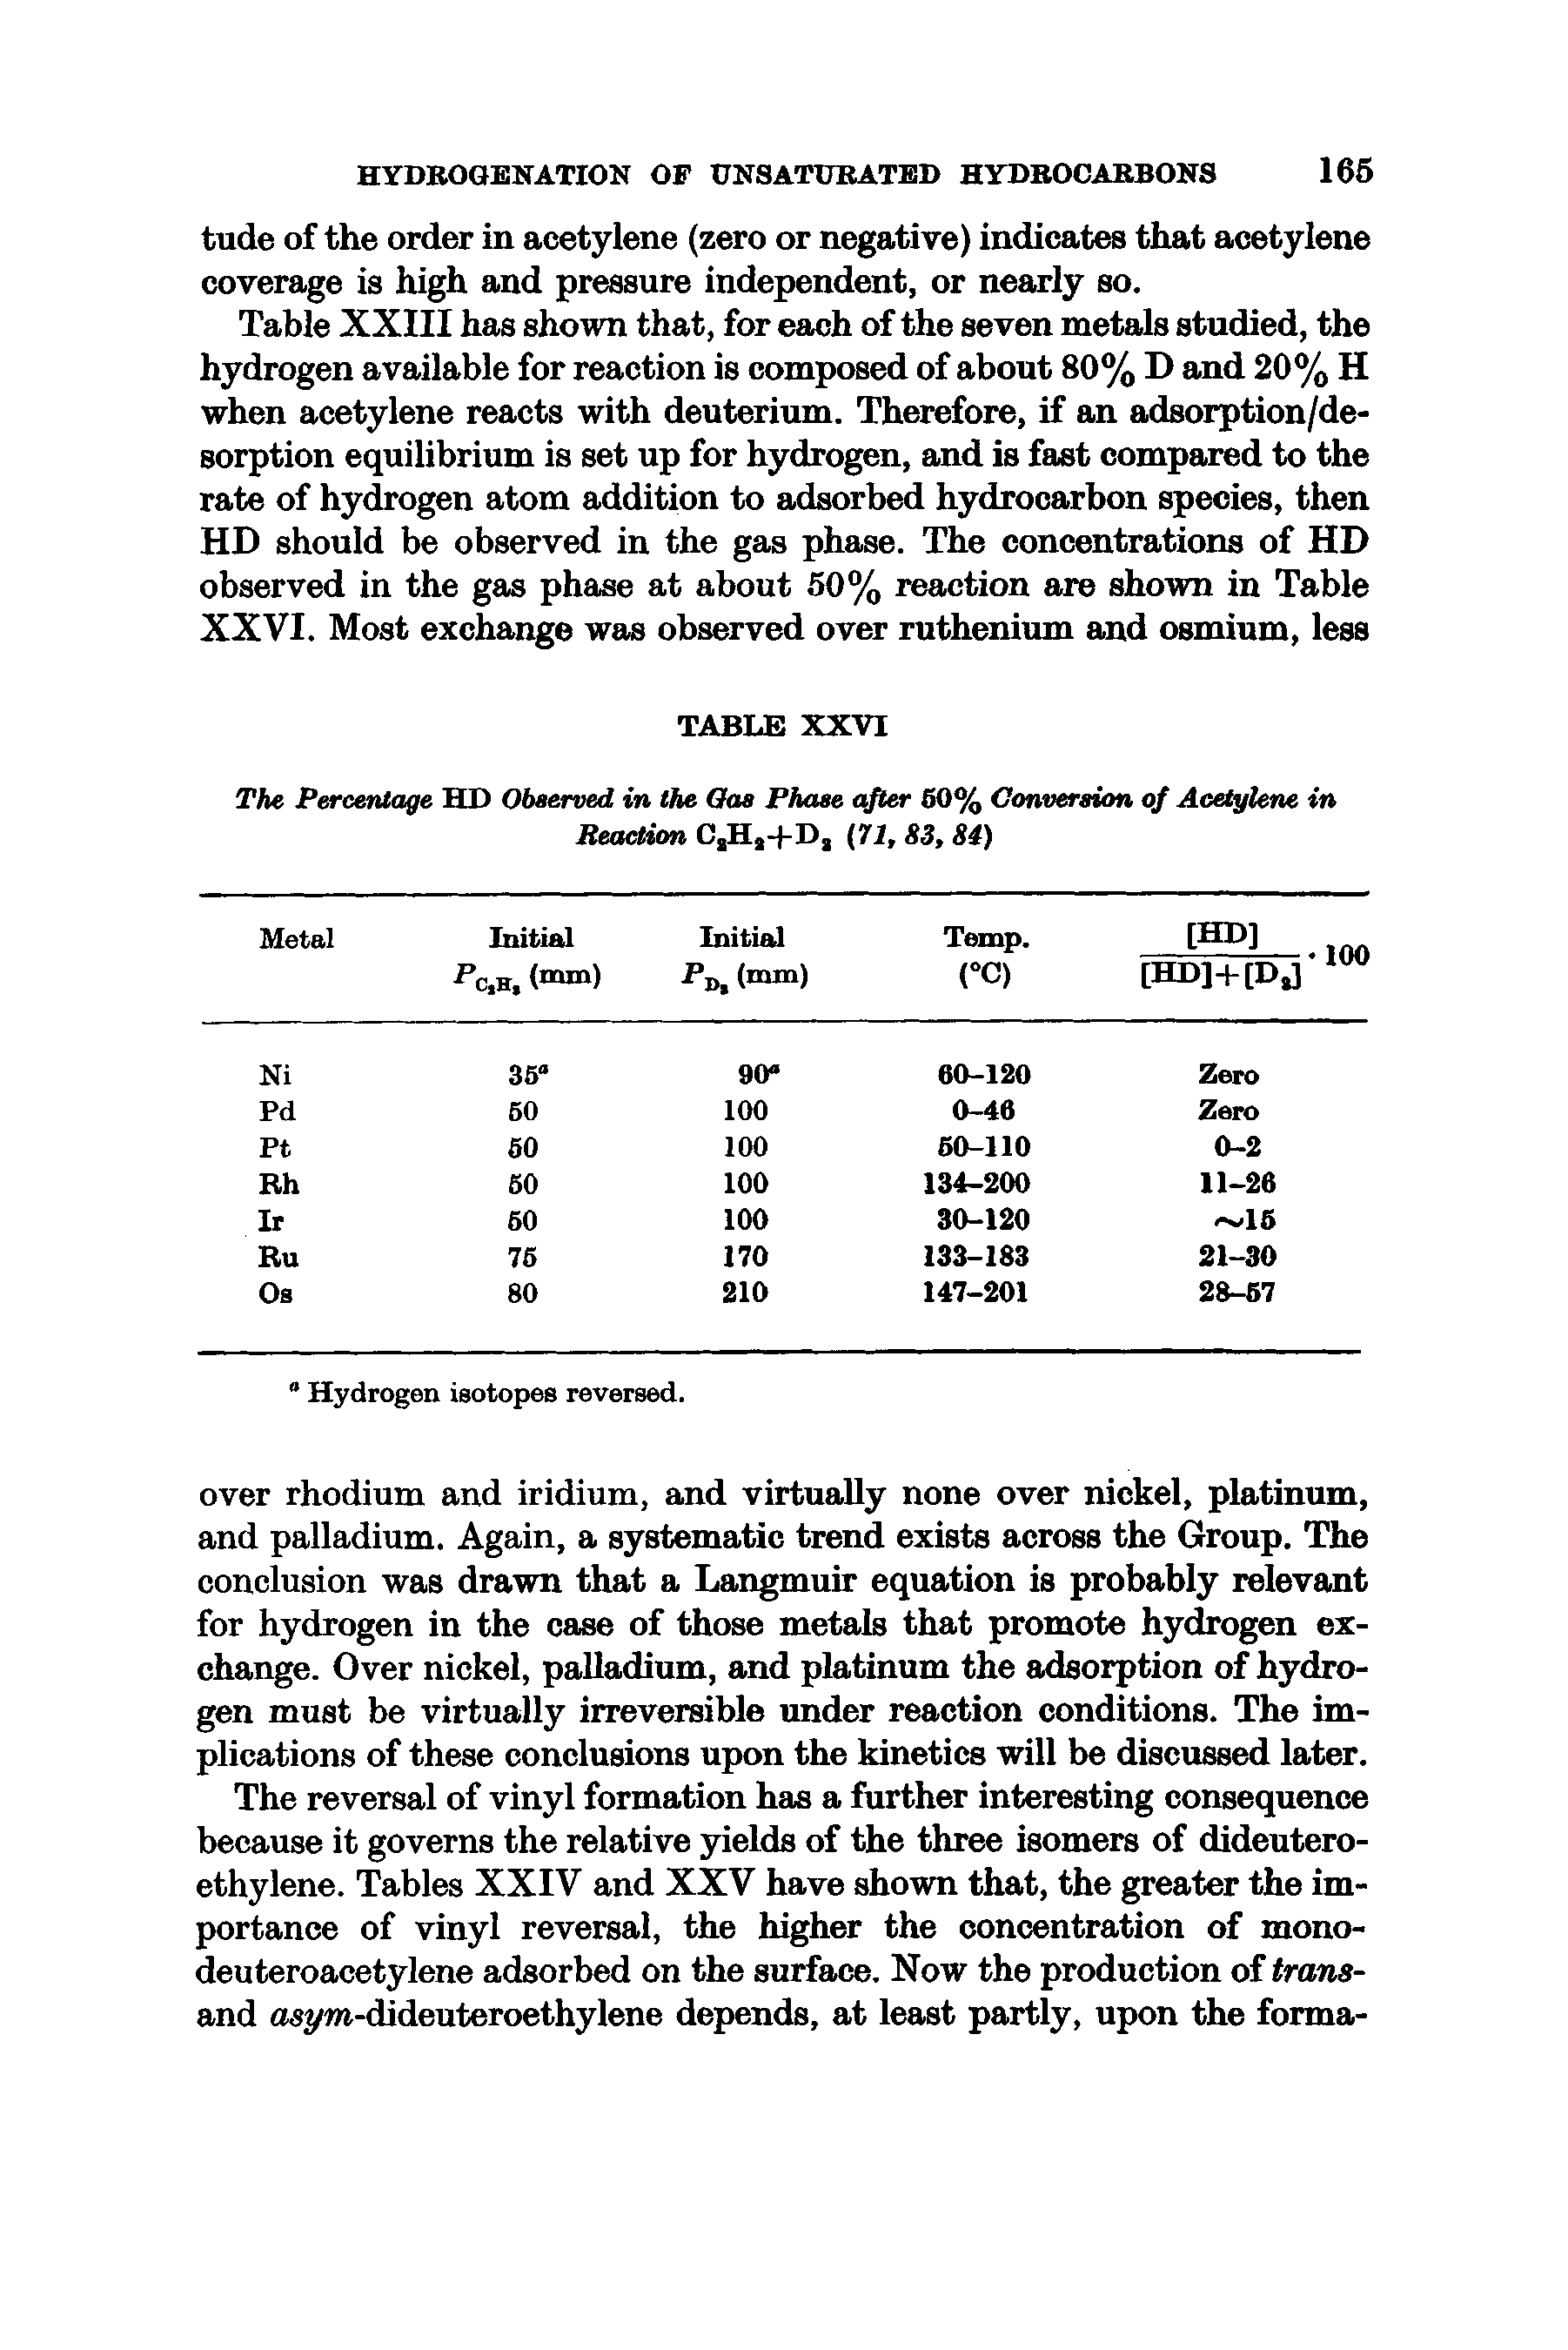 Table XXIII has shown that, for each of the seven metals studied, the hydrogen available for reaction is composed of about 80% D and 20% H when acetylene reacts with deuterium. Therefore, if an adsorption/de-sorption equilibrium is set up for hydrogen, and is fast compared to the rate of hydrogen atom addition to adsorbed hydrocarbon species, then HD should be observed in the gas phase. The concentrations of HD observed in the gas phase at about 50% reaction are shown in Table XXVI. Most exchange was observed over ruthenium and osmium, less...